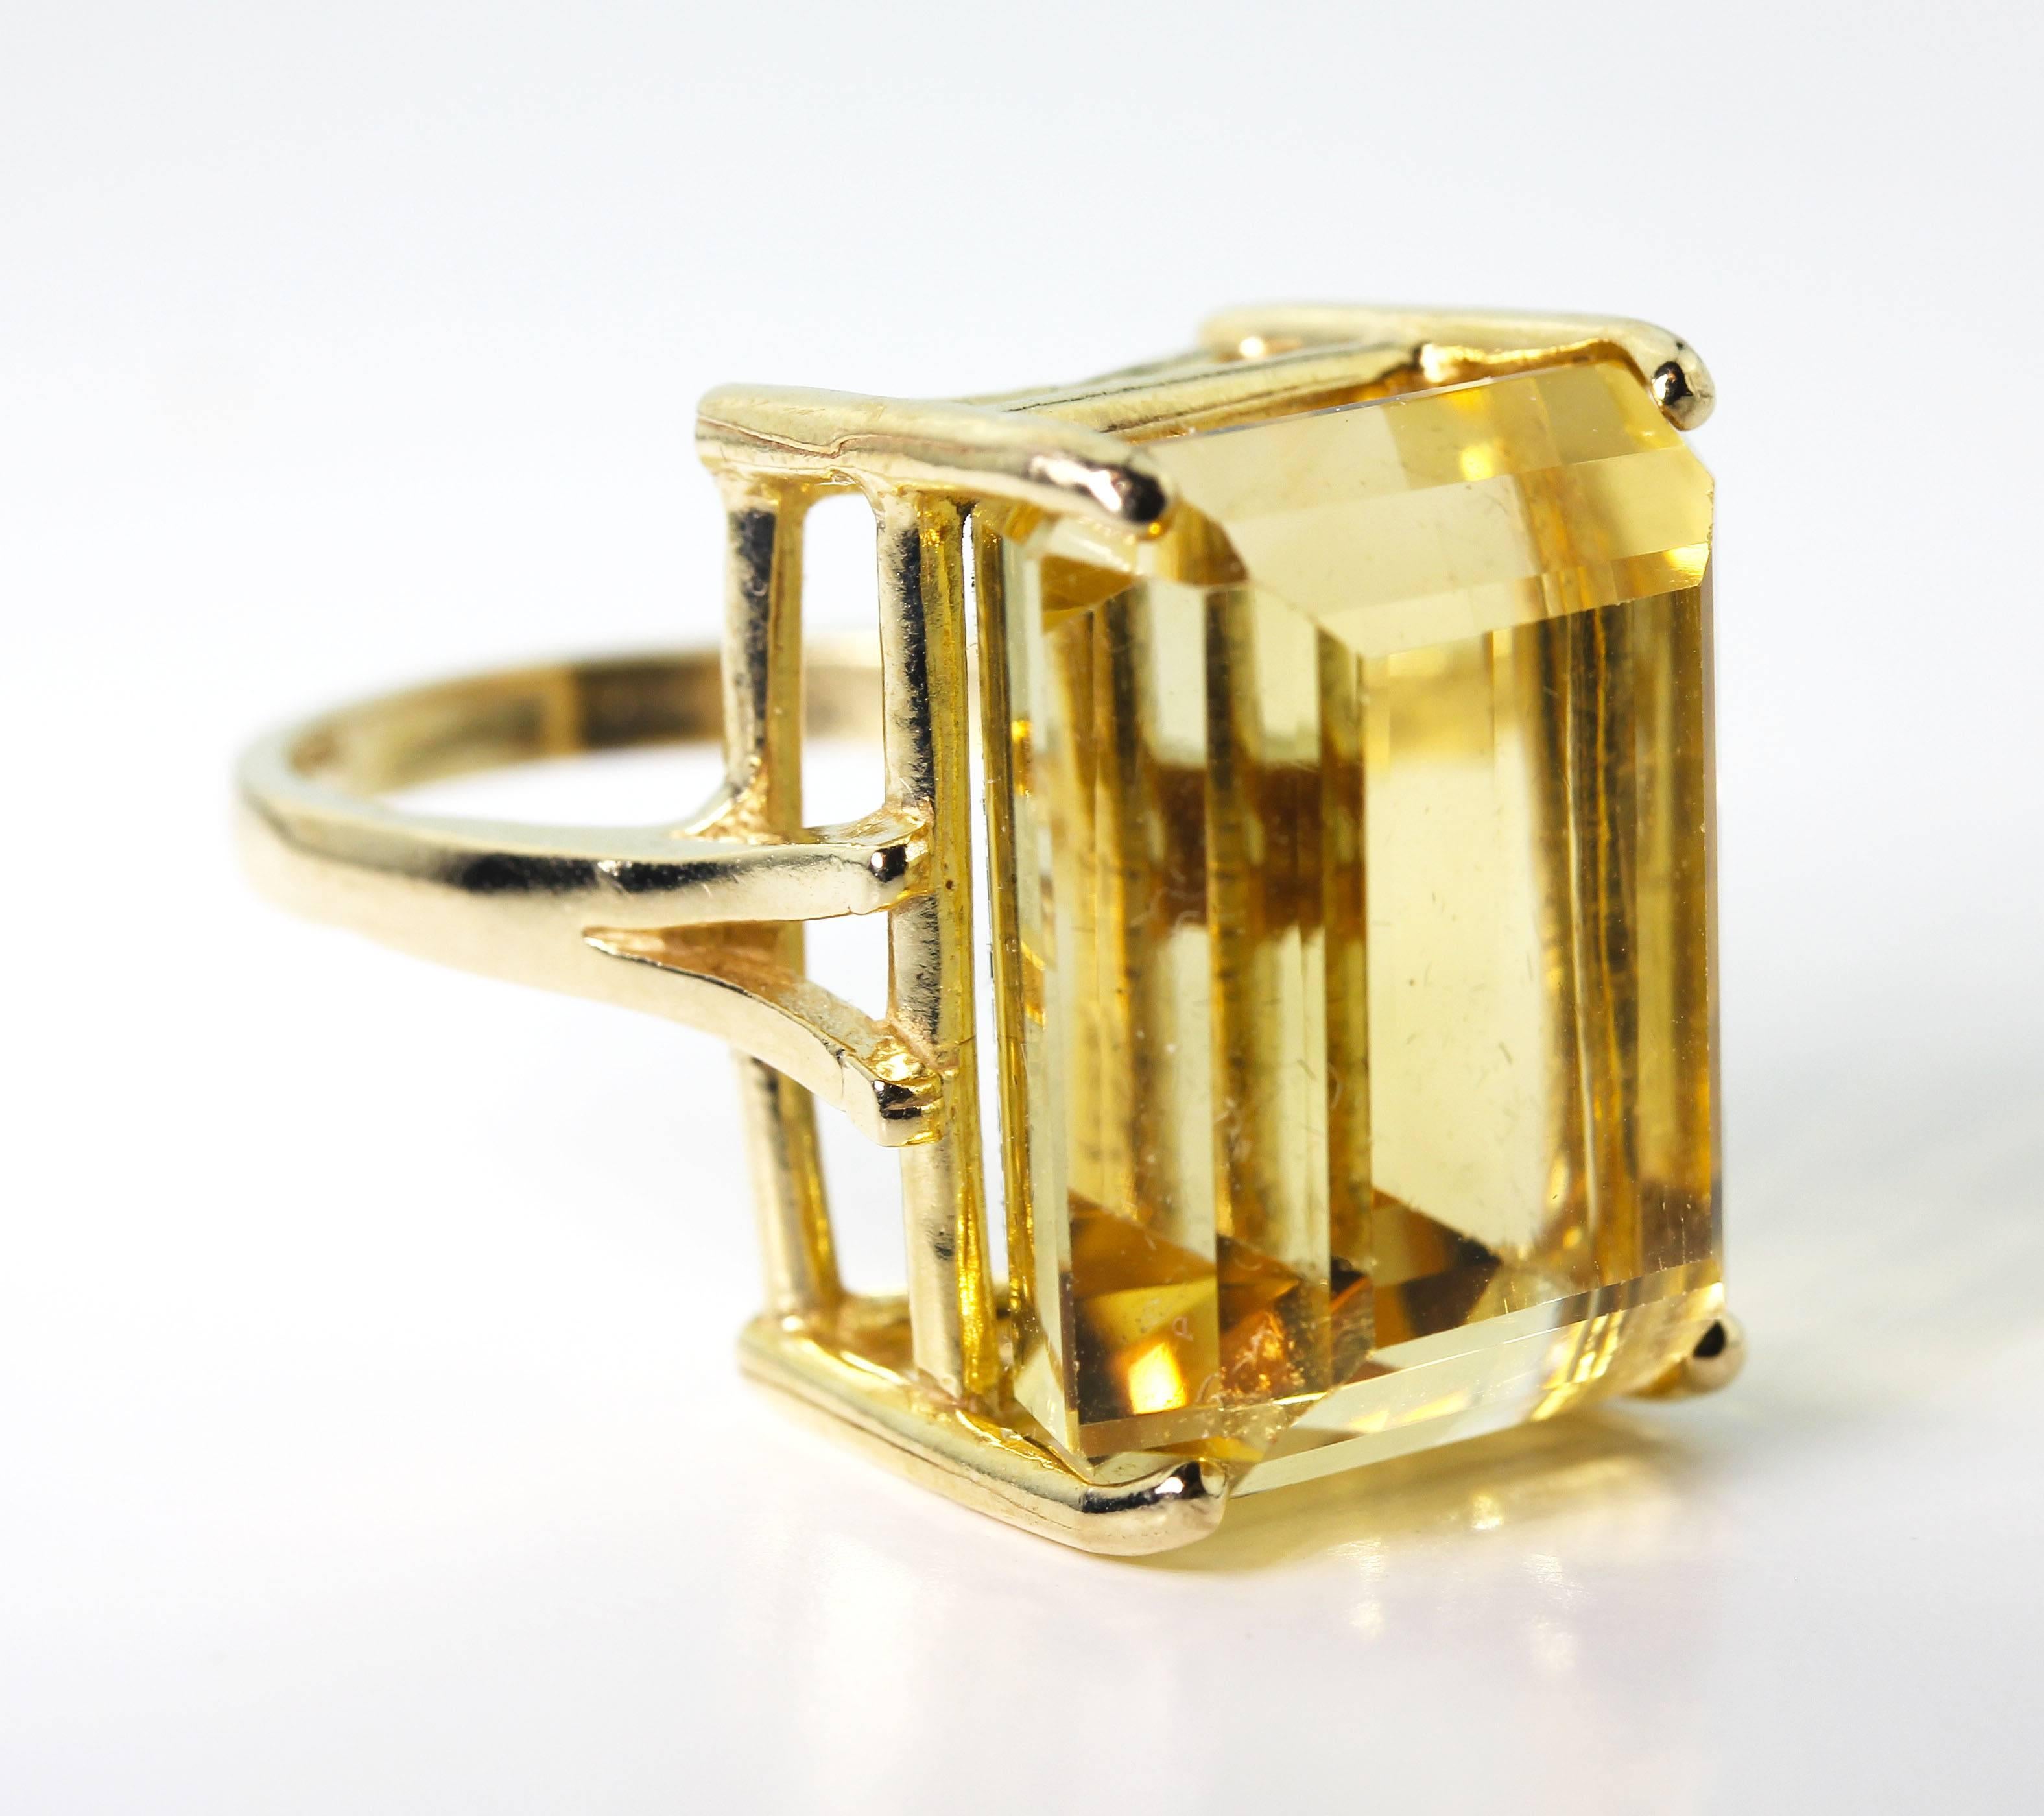 Huge glowing yellow 27 Carat (14.55 mm x 18.4 mm) natural Madagascar Citrine gold ring.  The ring is 14Kt yellow gold and is a size 7 (sizable).  Note that this is a fairly rare gemstone and its yellow color is brilliantly and splendidly different